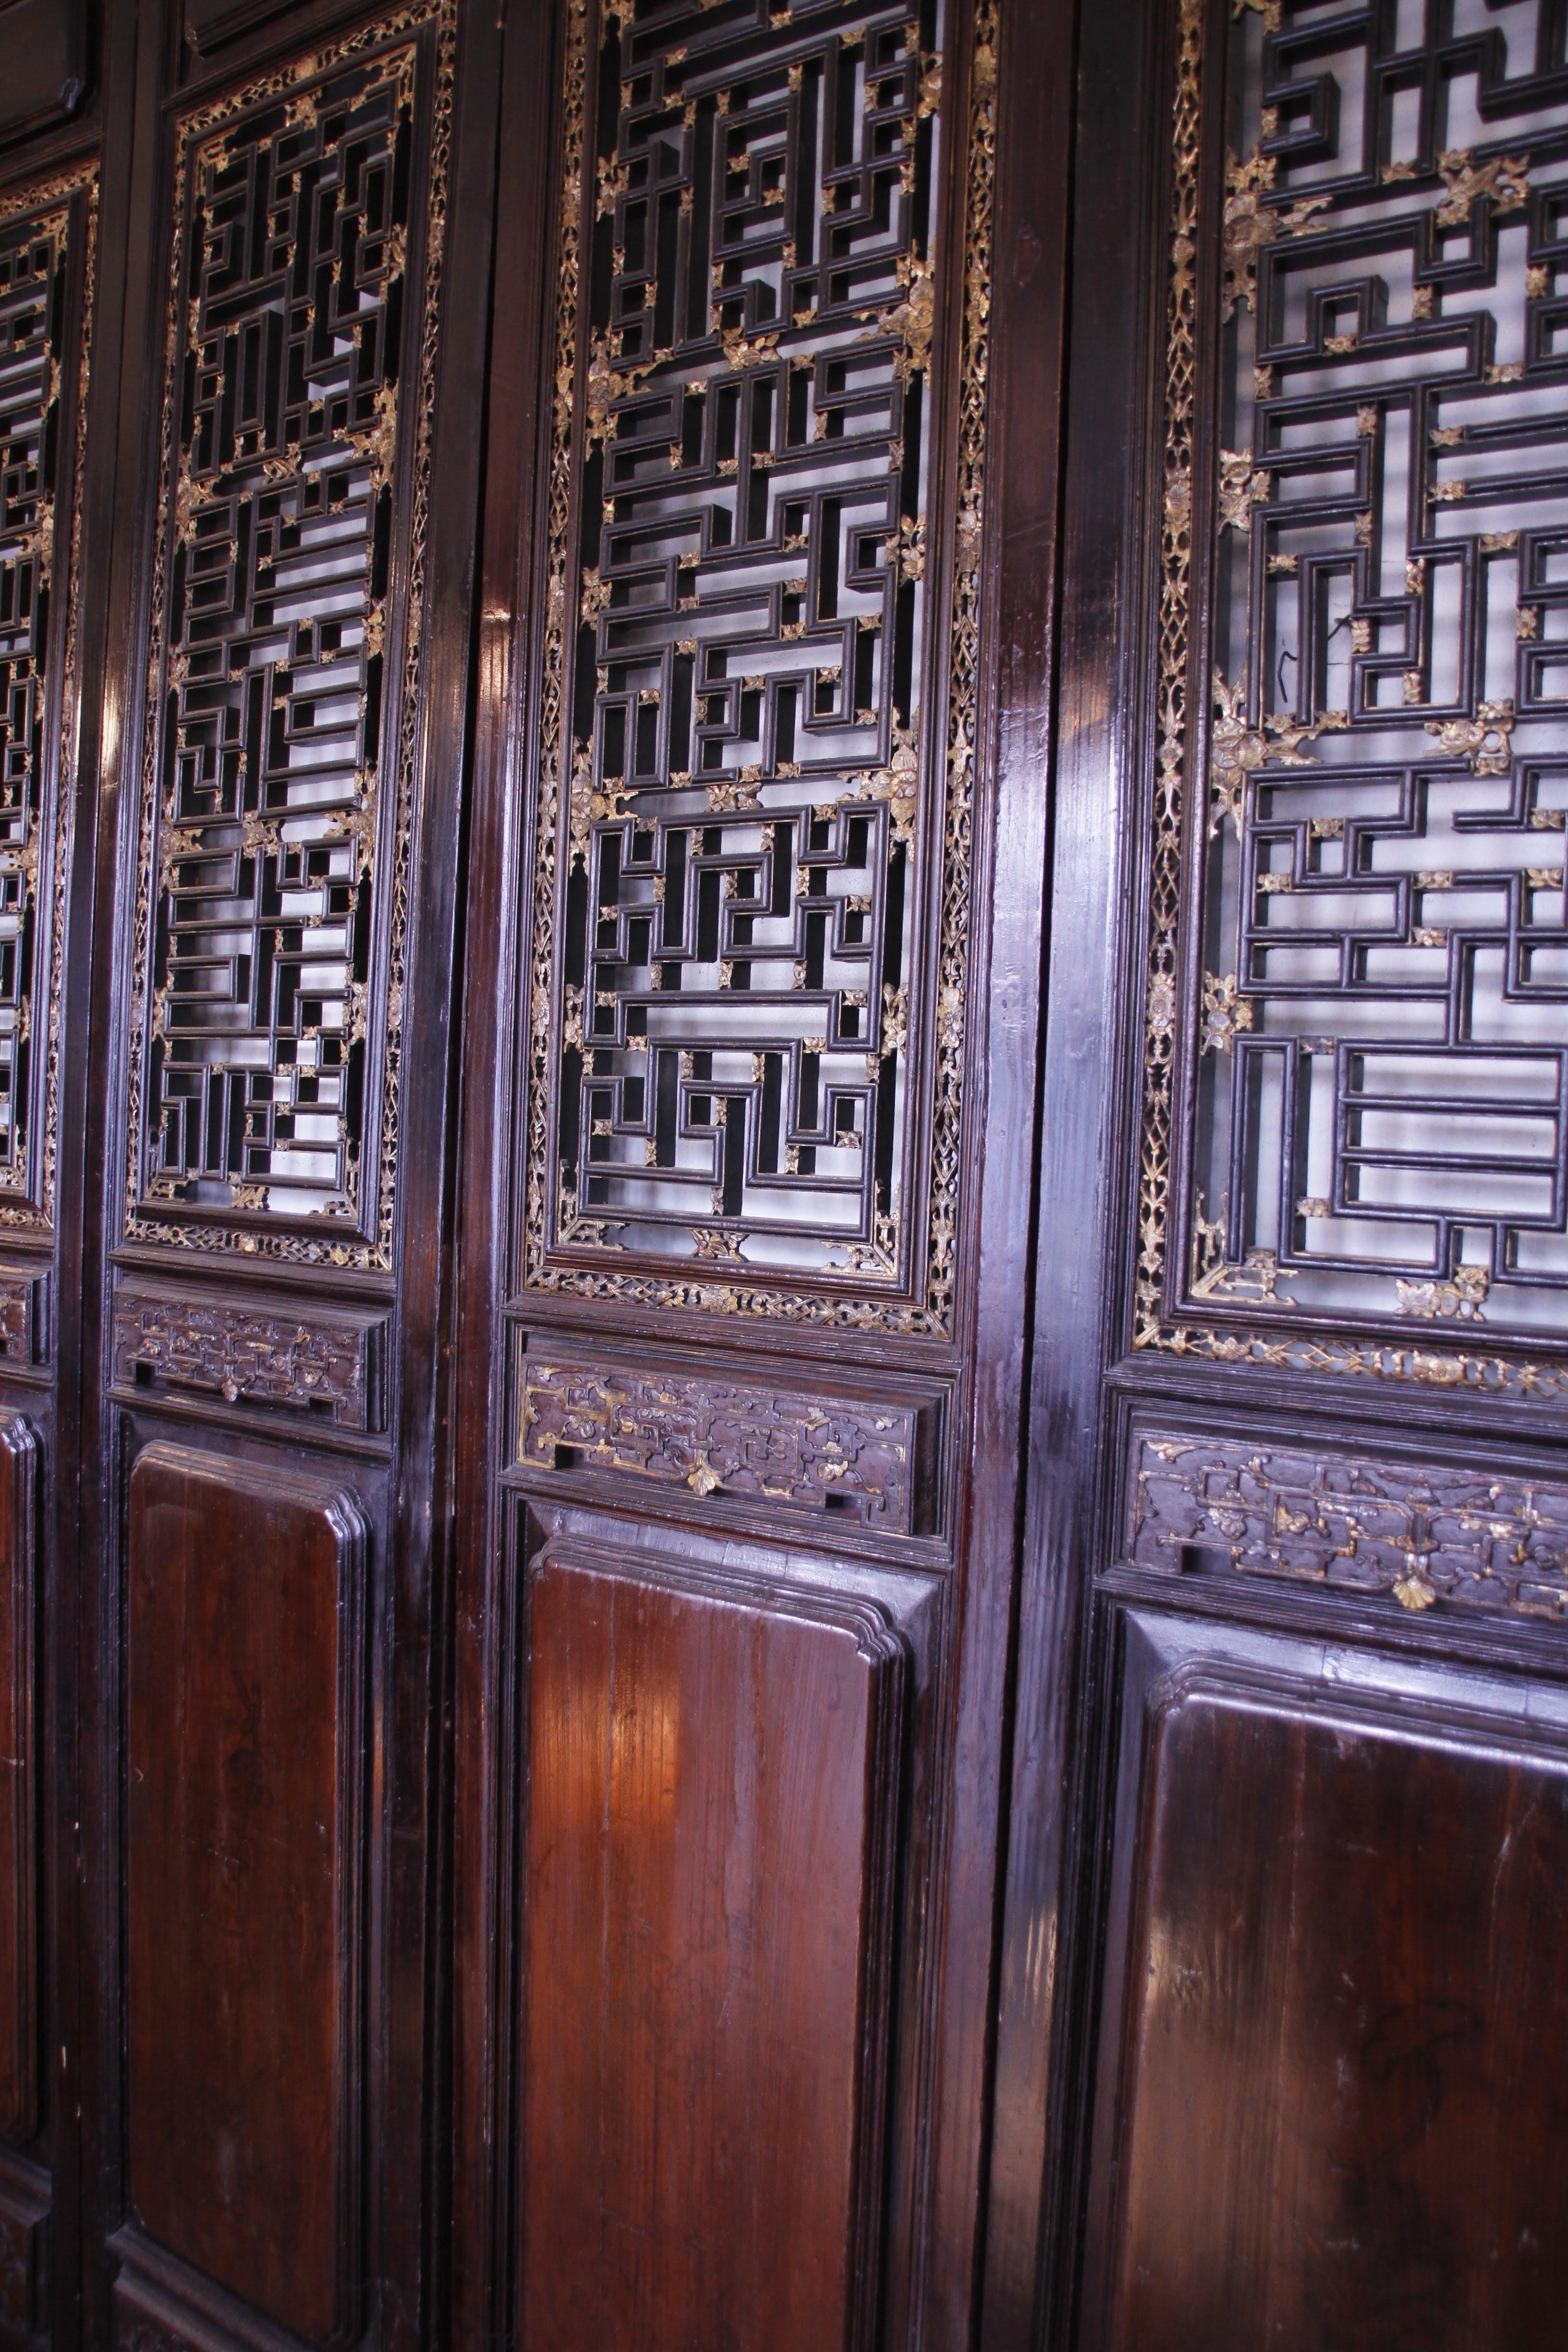 Antique, solid wood late 19th century room divider with gold decorations and fine carvings. With his out of ordinary dimensions, is an extremely rare piece.

Please note that all of our items are shipped after a microwave woodworm treatment,